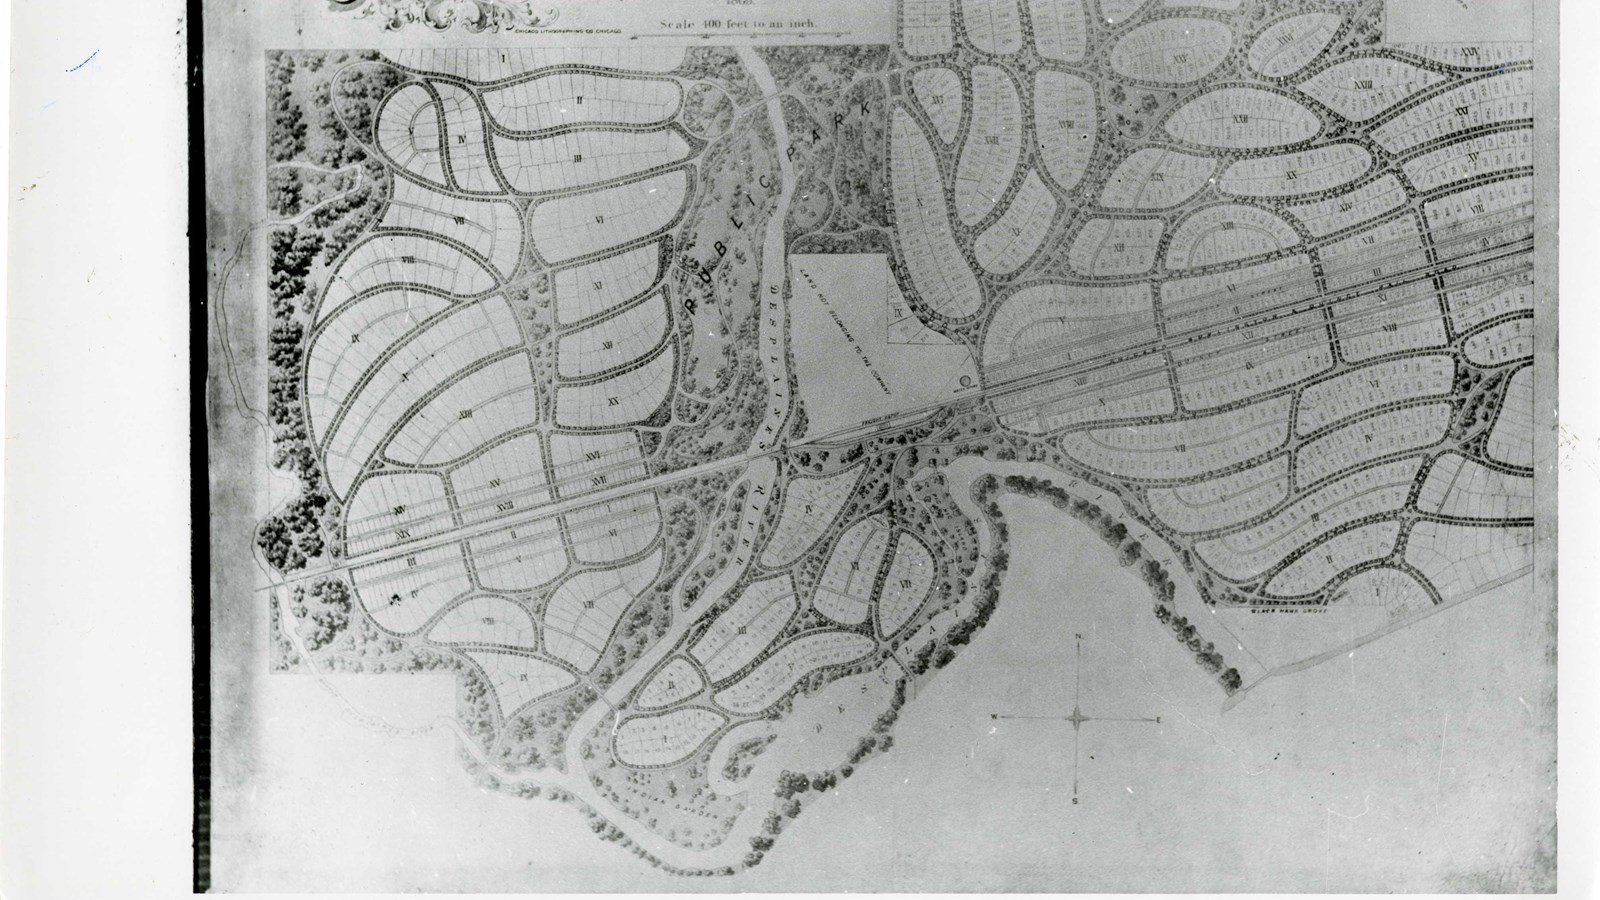 Plan of community with many curving lines and lots for homes along the road, roads lined with trees